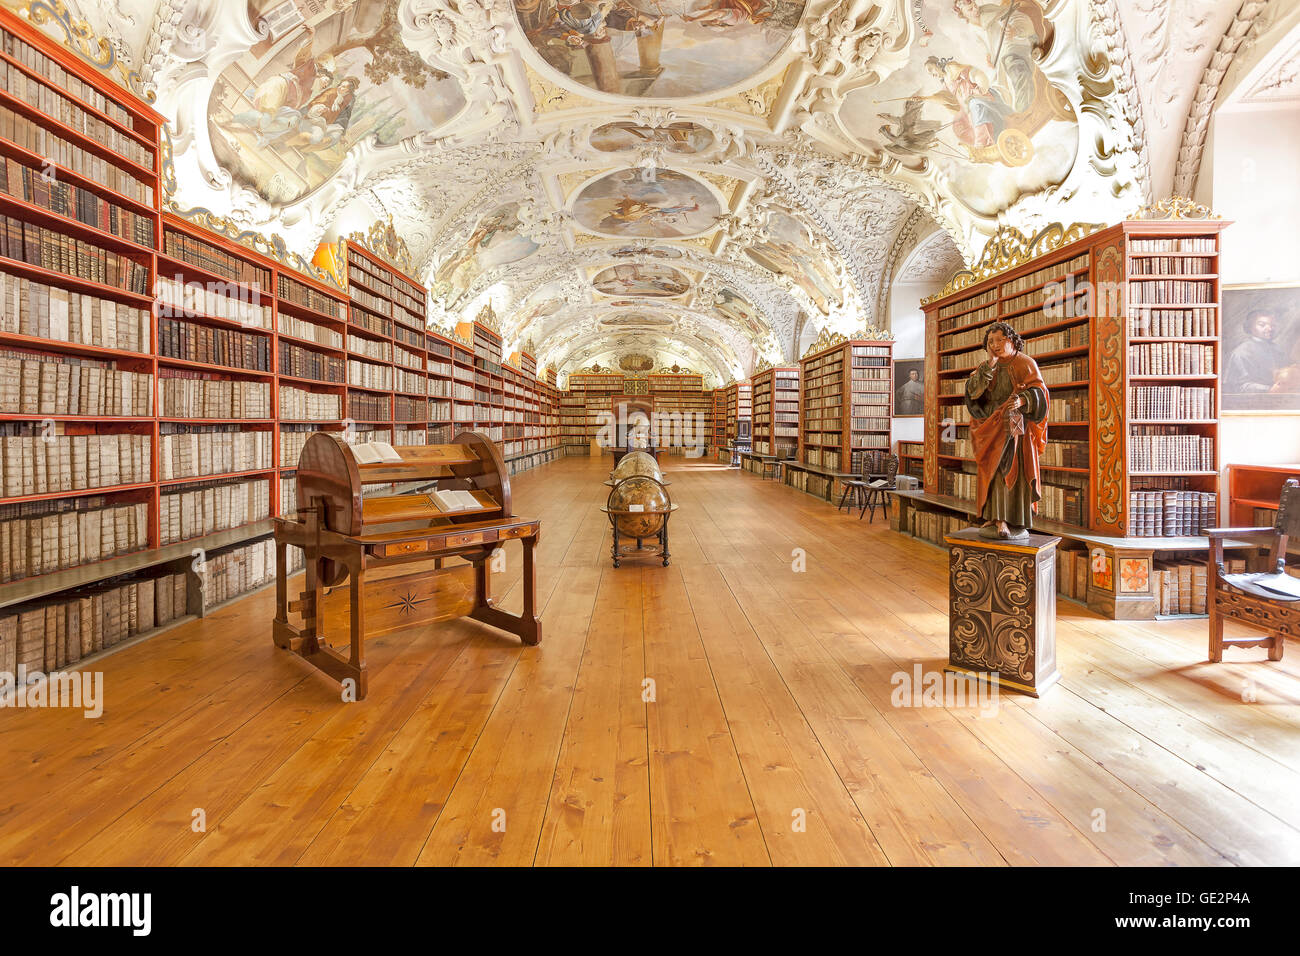 Prague, Czech Republic- June 15, 2014: The Theological Hall in Strahov monastery in Prague, one of the finest library interiors Stock Photo